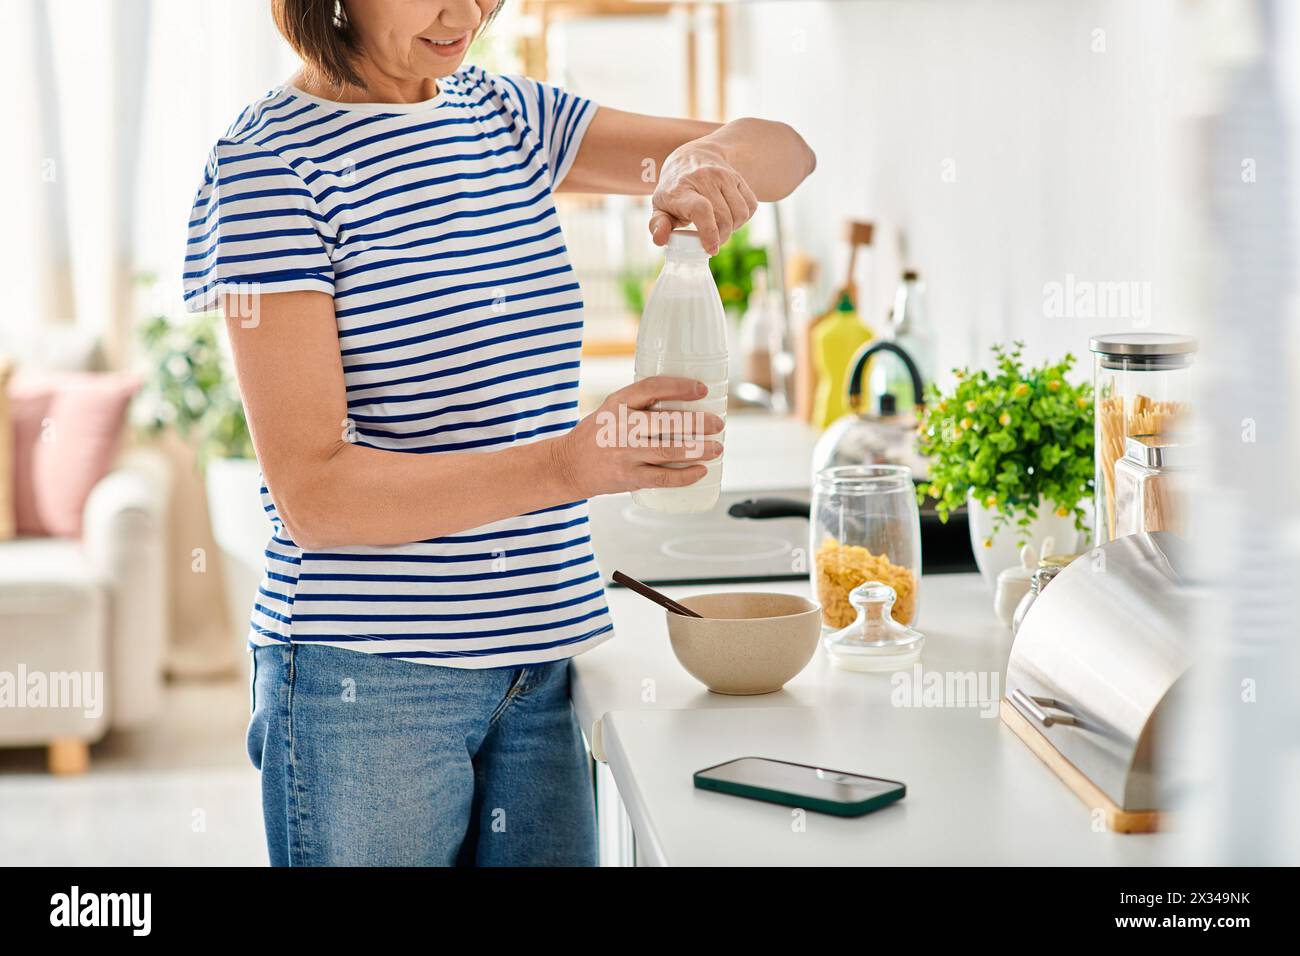 A woman in cozy homewear, standing in a kitchen, preparing food. Stock Photo